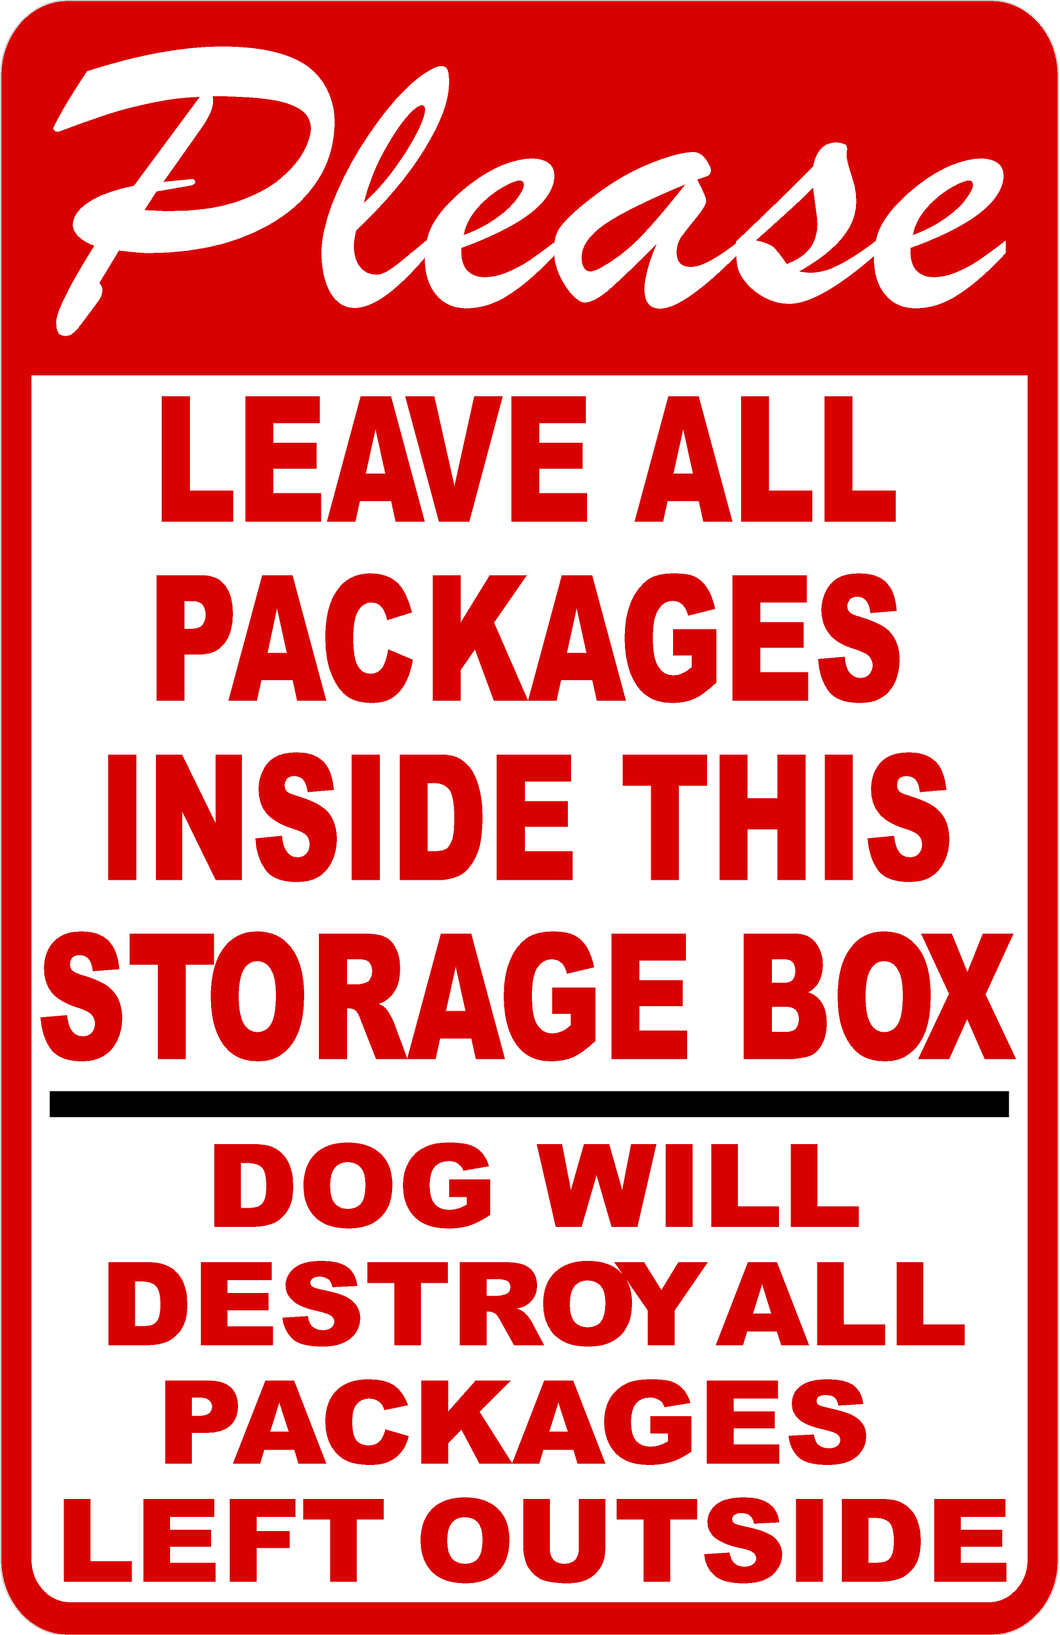 Please Leave All Packages Inside of Storage Box Dog Will Destroy Sign